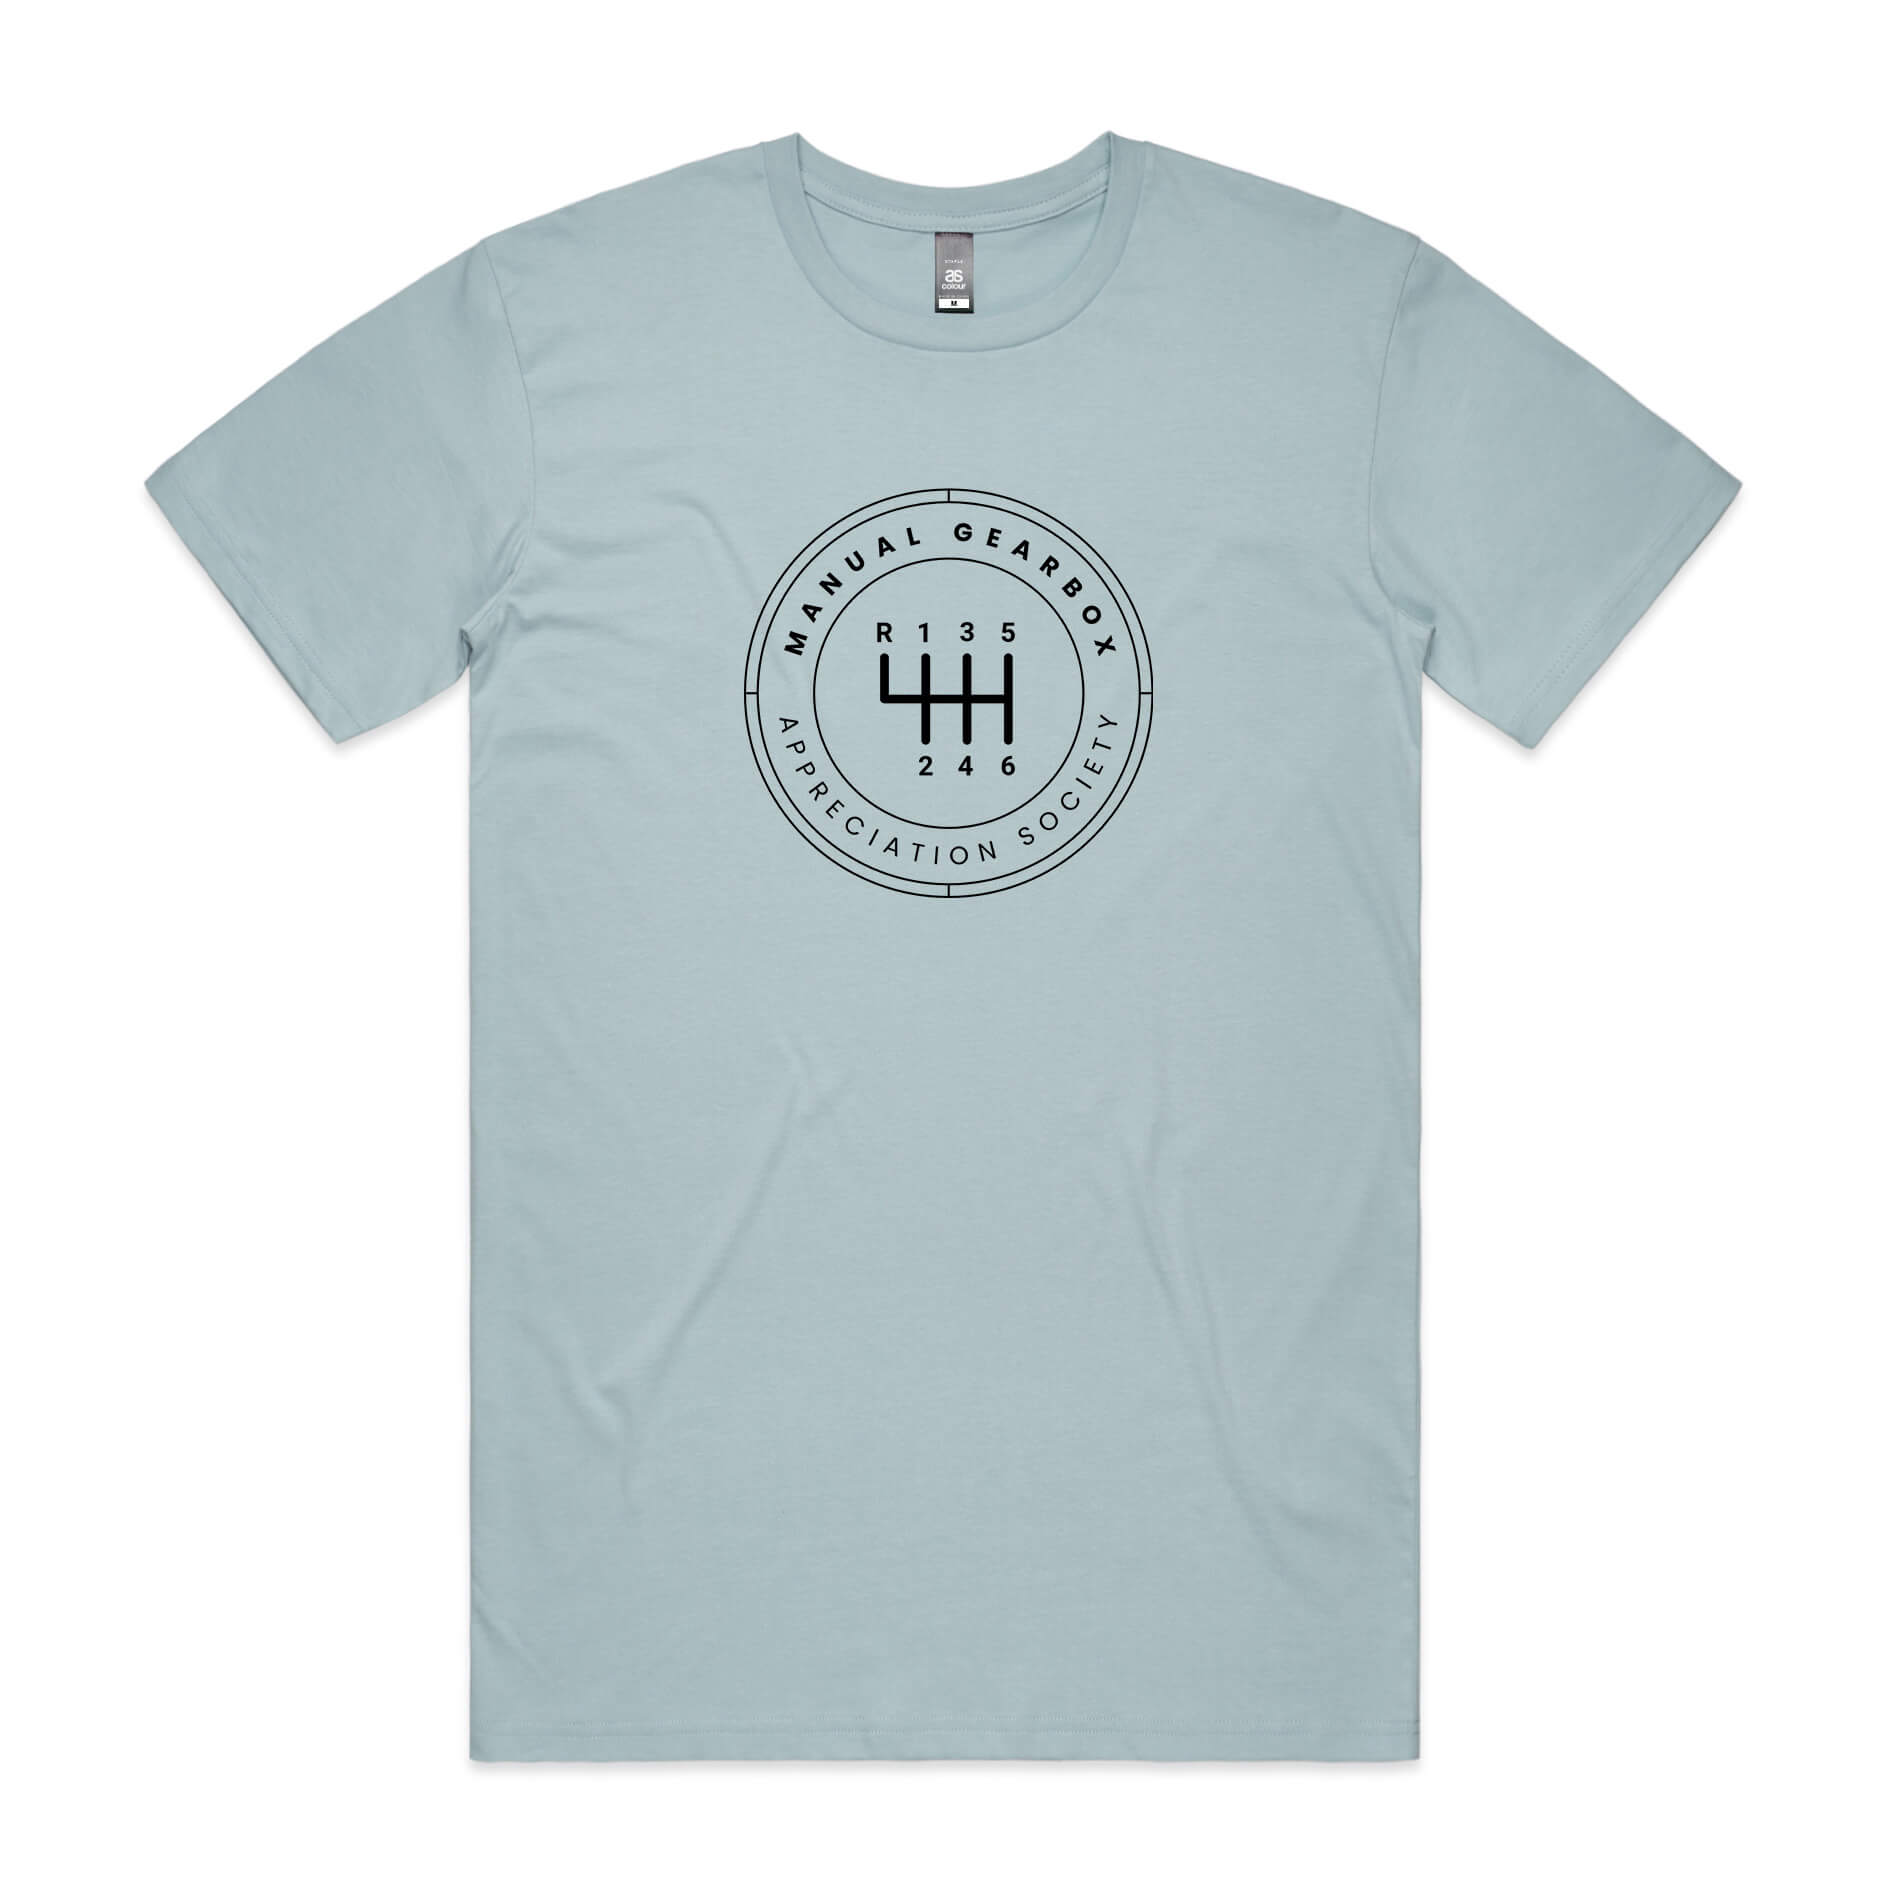 Manual gearbox t-shirt in light blue